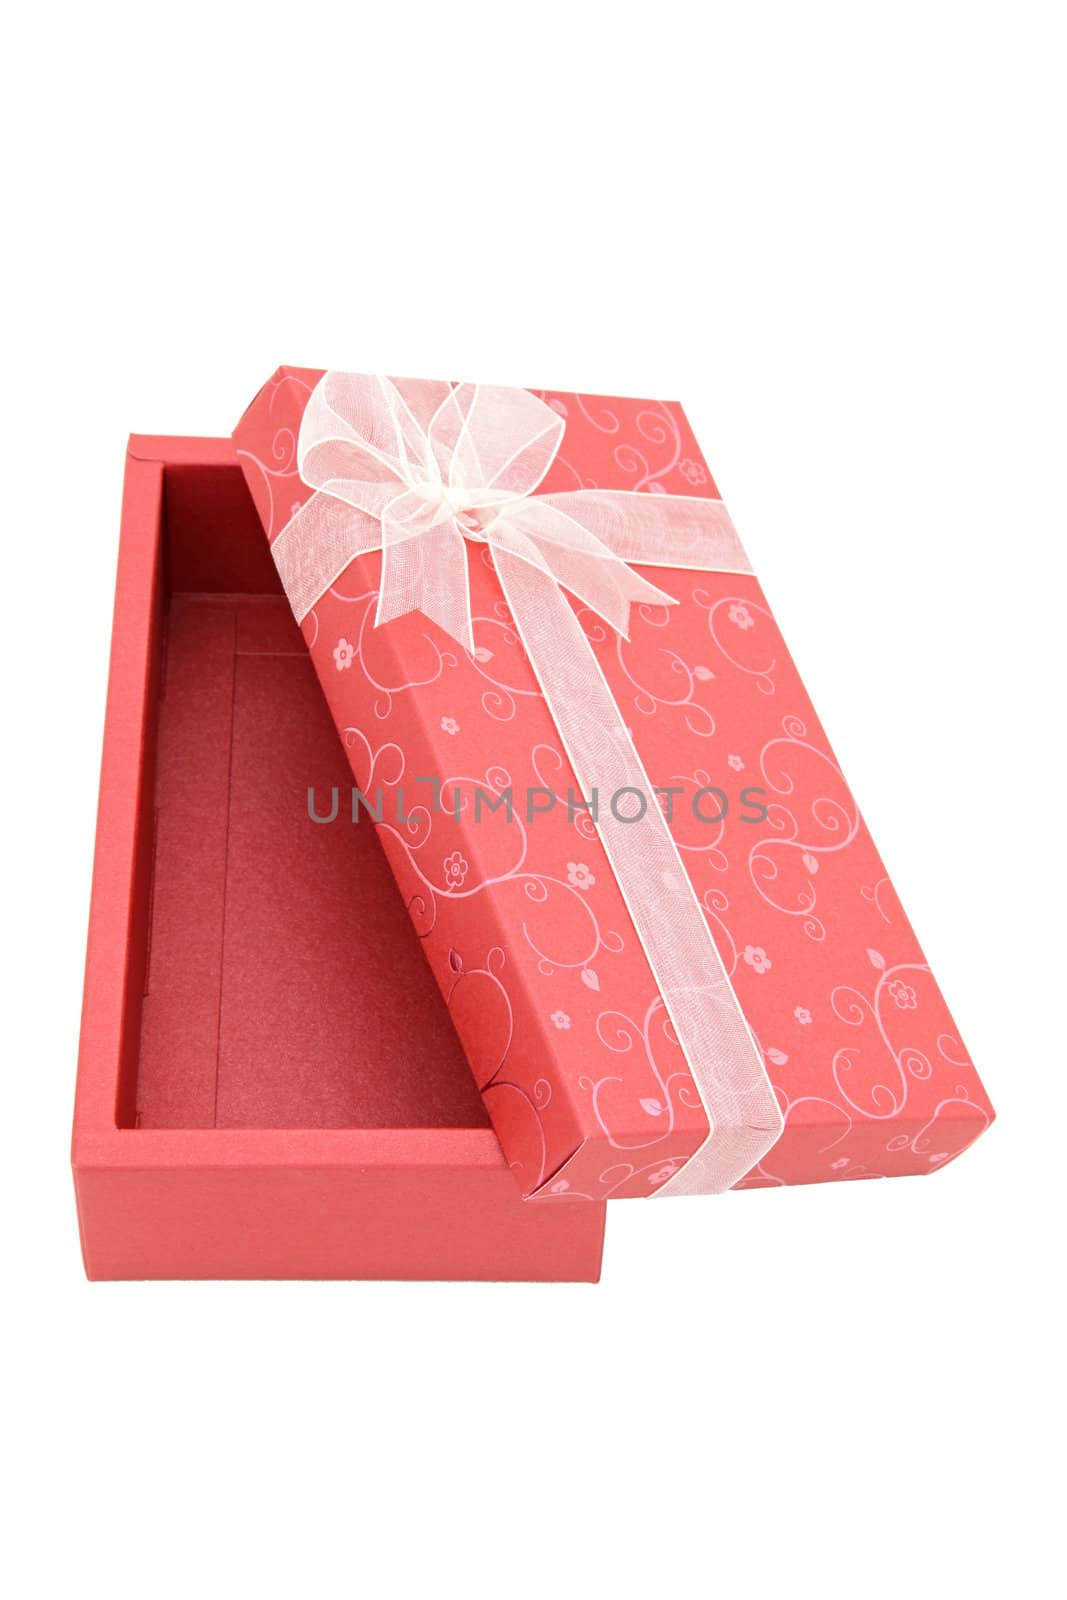 perspective of isolated open red holiday gift box, vertical